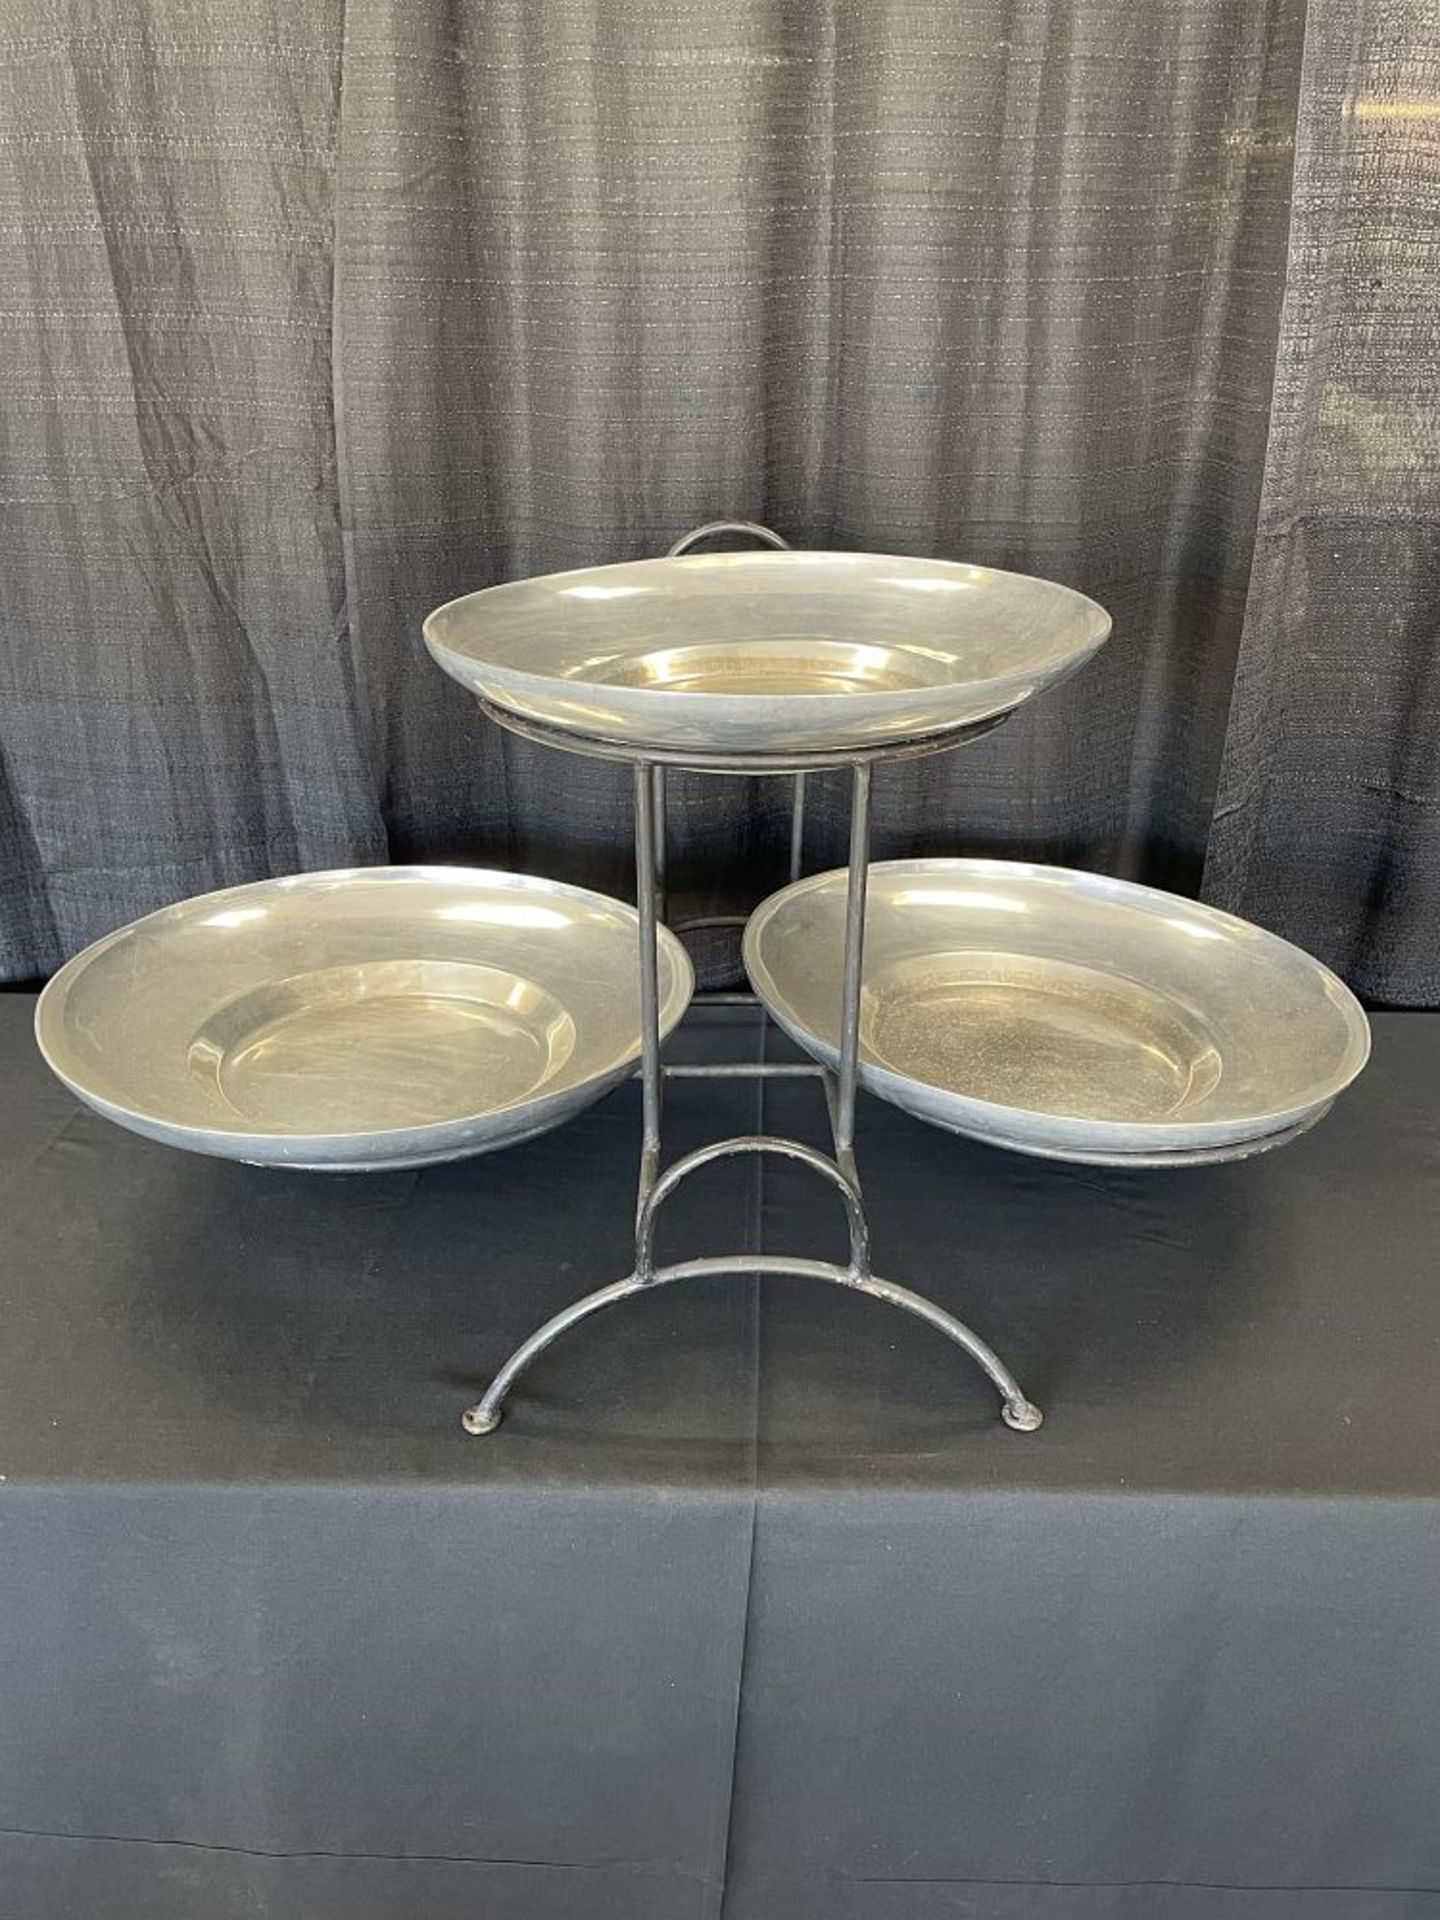 21" 3-tier Round Metal Tray w/ Stand